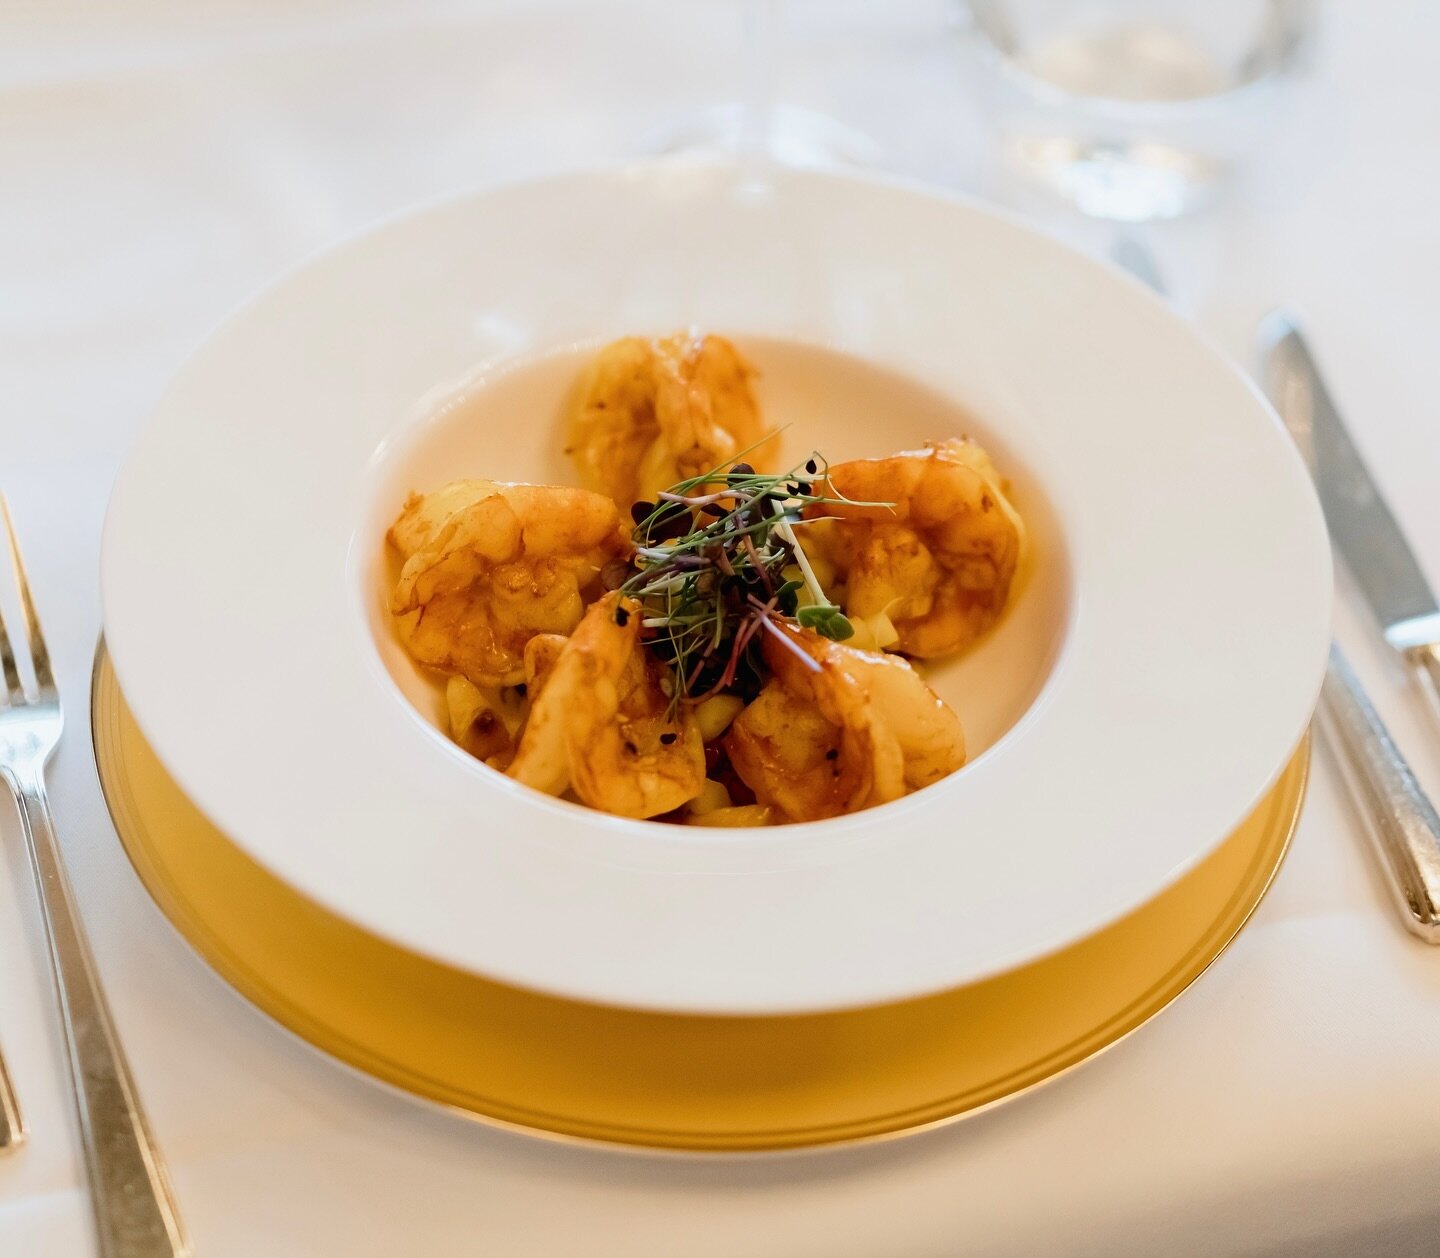 Introducing new dishes at India Club ✨ treat your tastebuds to our new mouth-watering prawn curry with a taste of lemon and roman coriander. Available from Monday. #indiaclubberlin